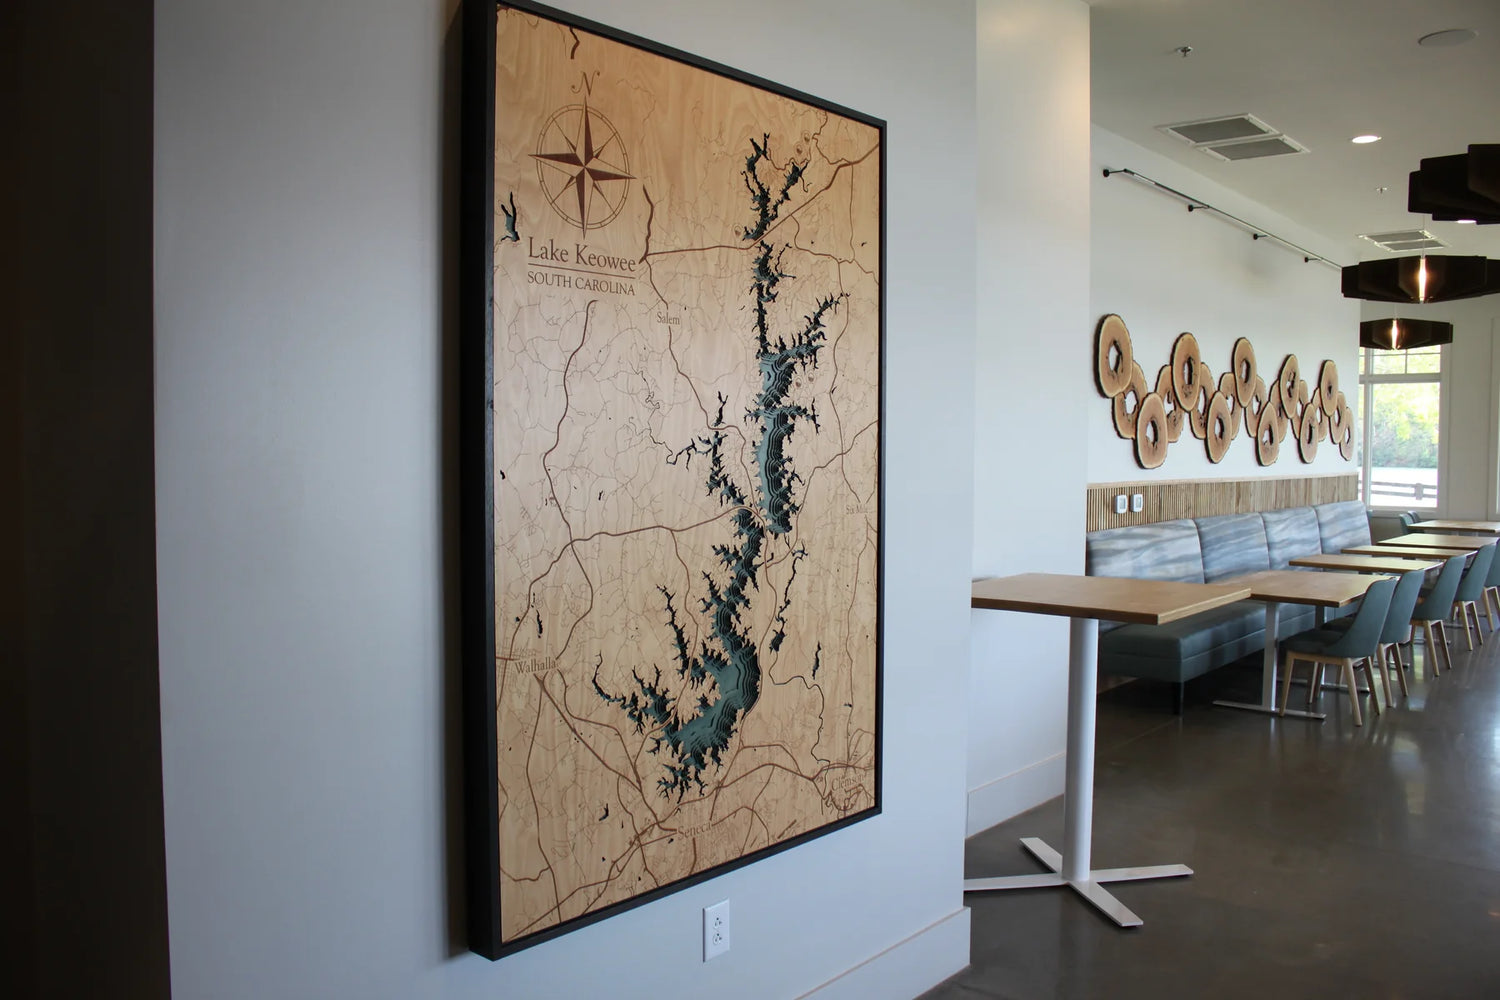 Laser cut and painted Lake Keowee Map hanging a storefront setting.